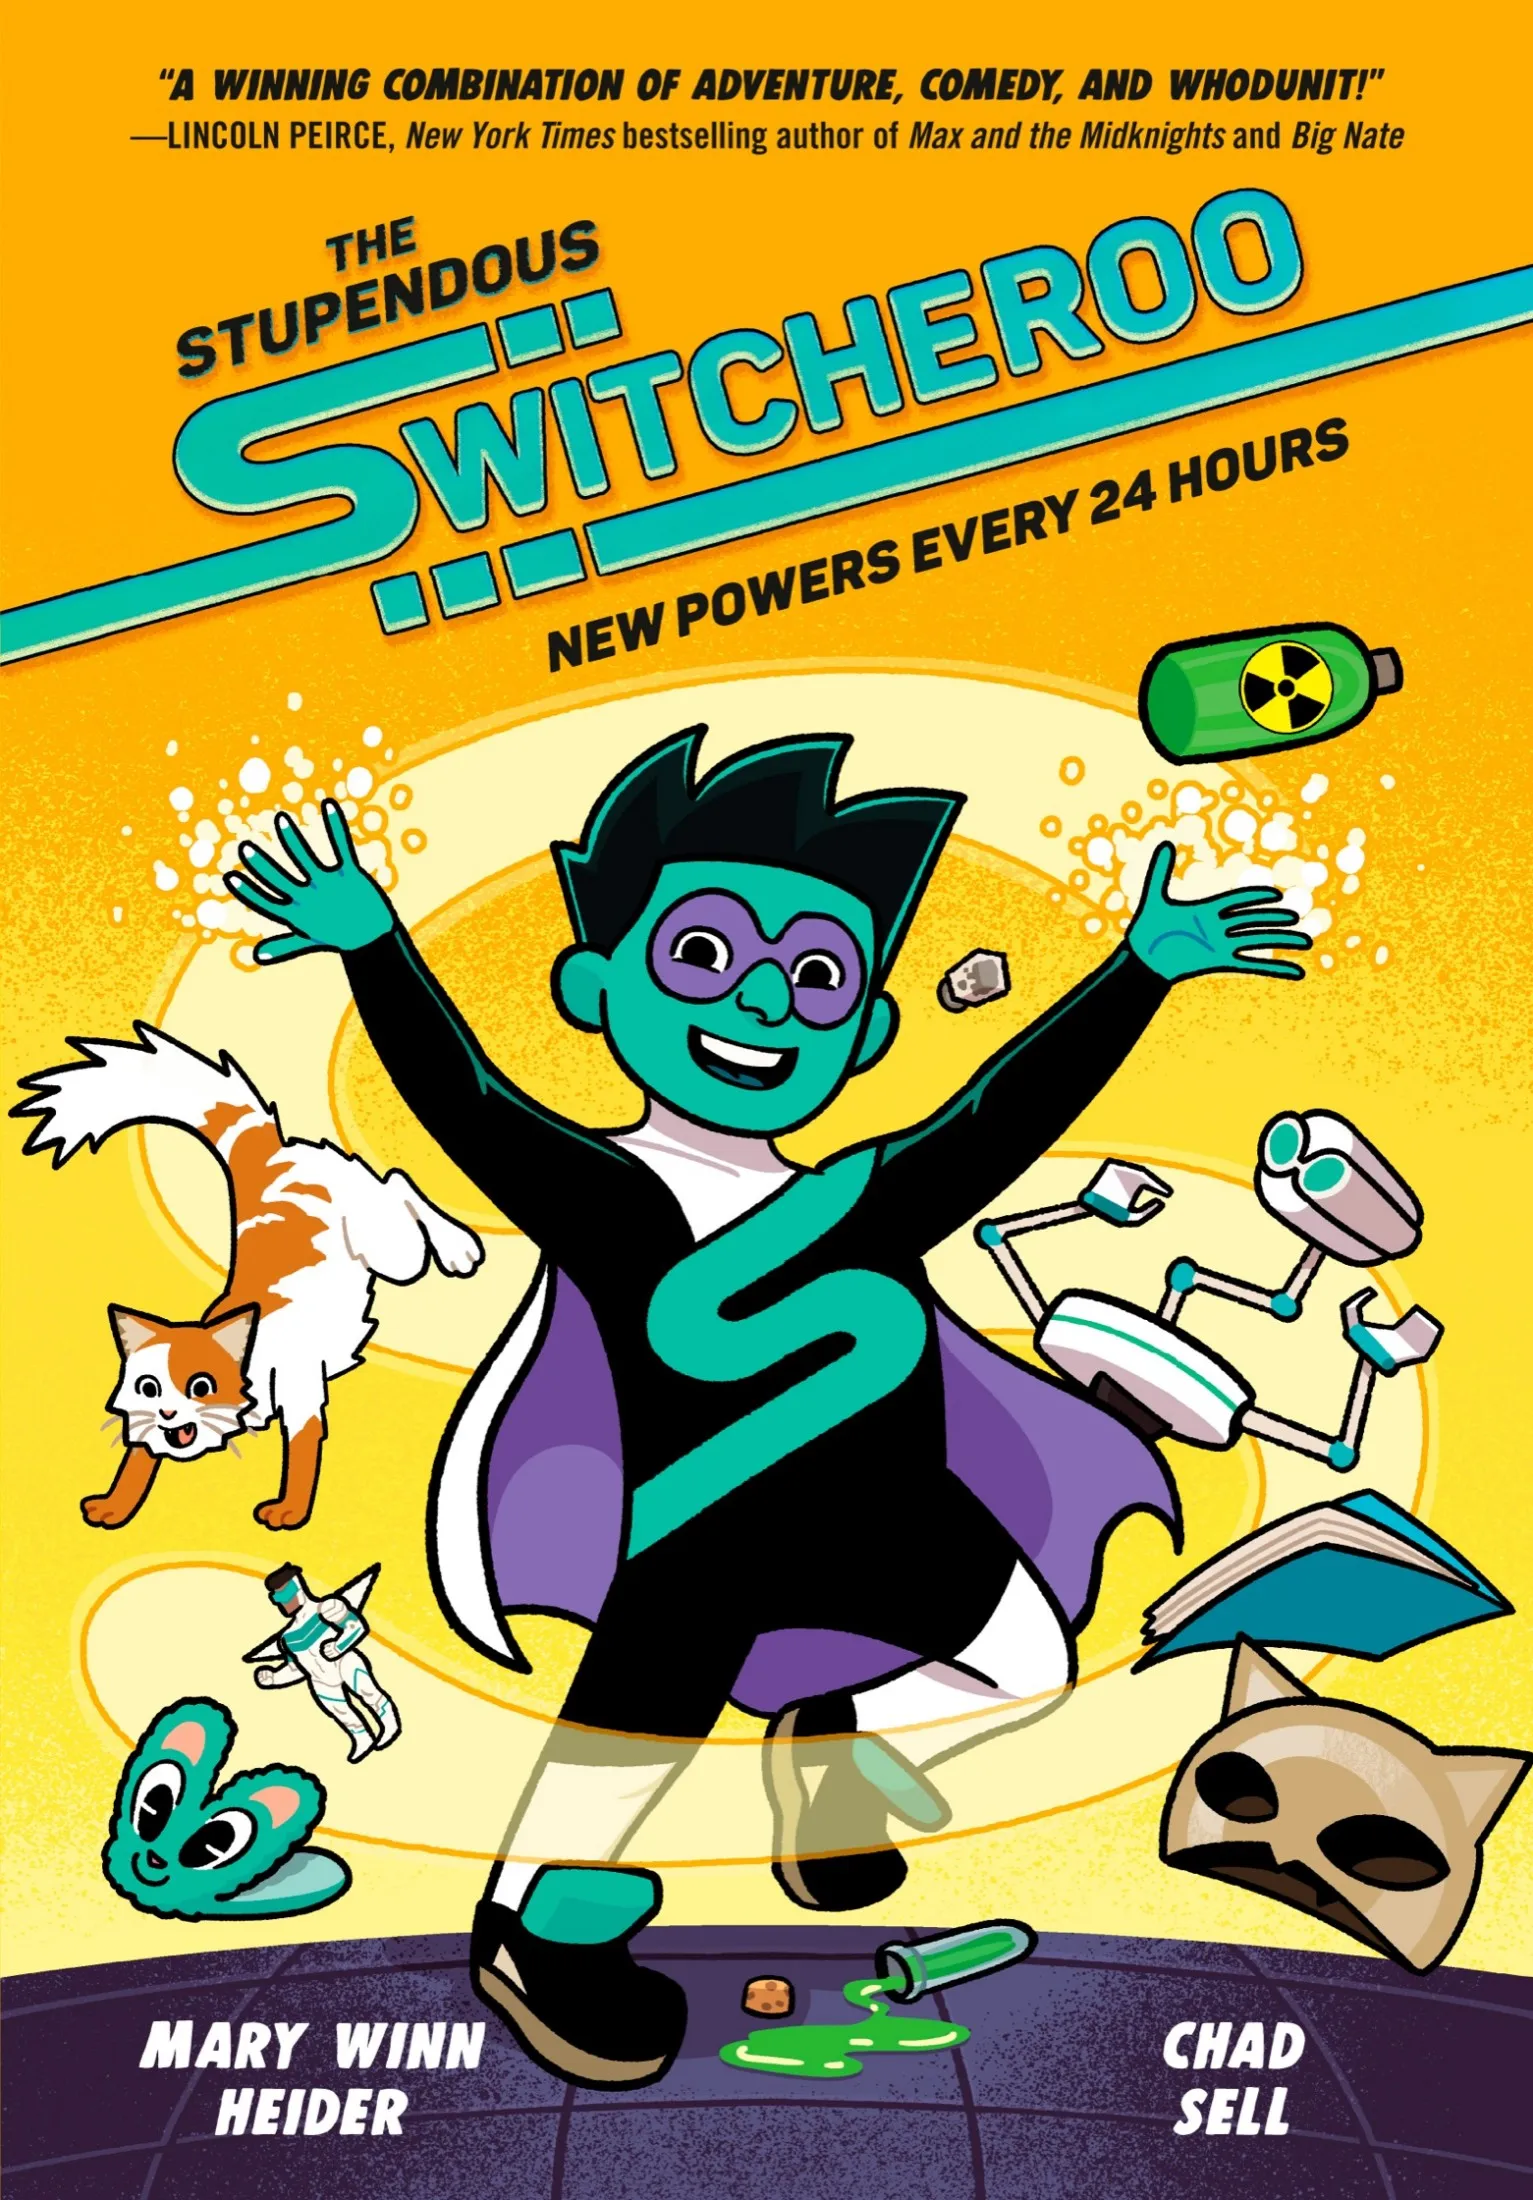 New Powers Every 24 Hours (The Stupendous Switcheroo #2)